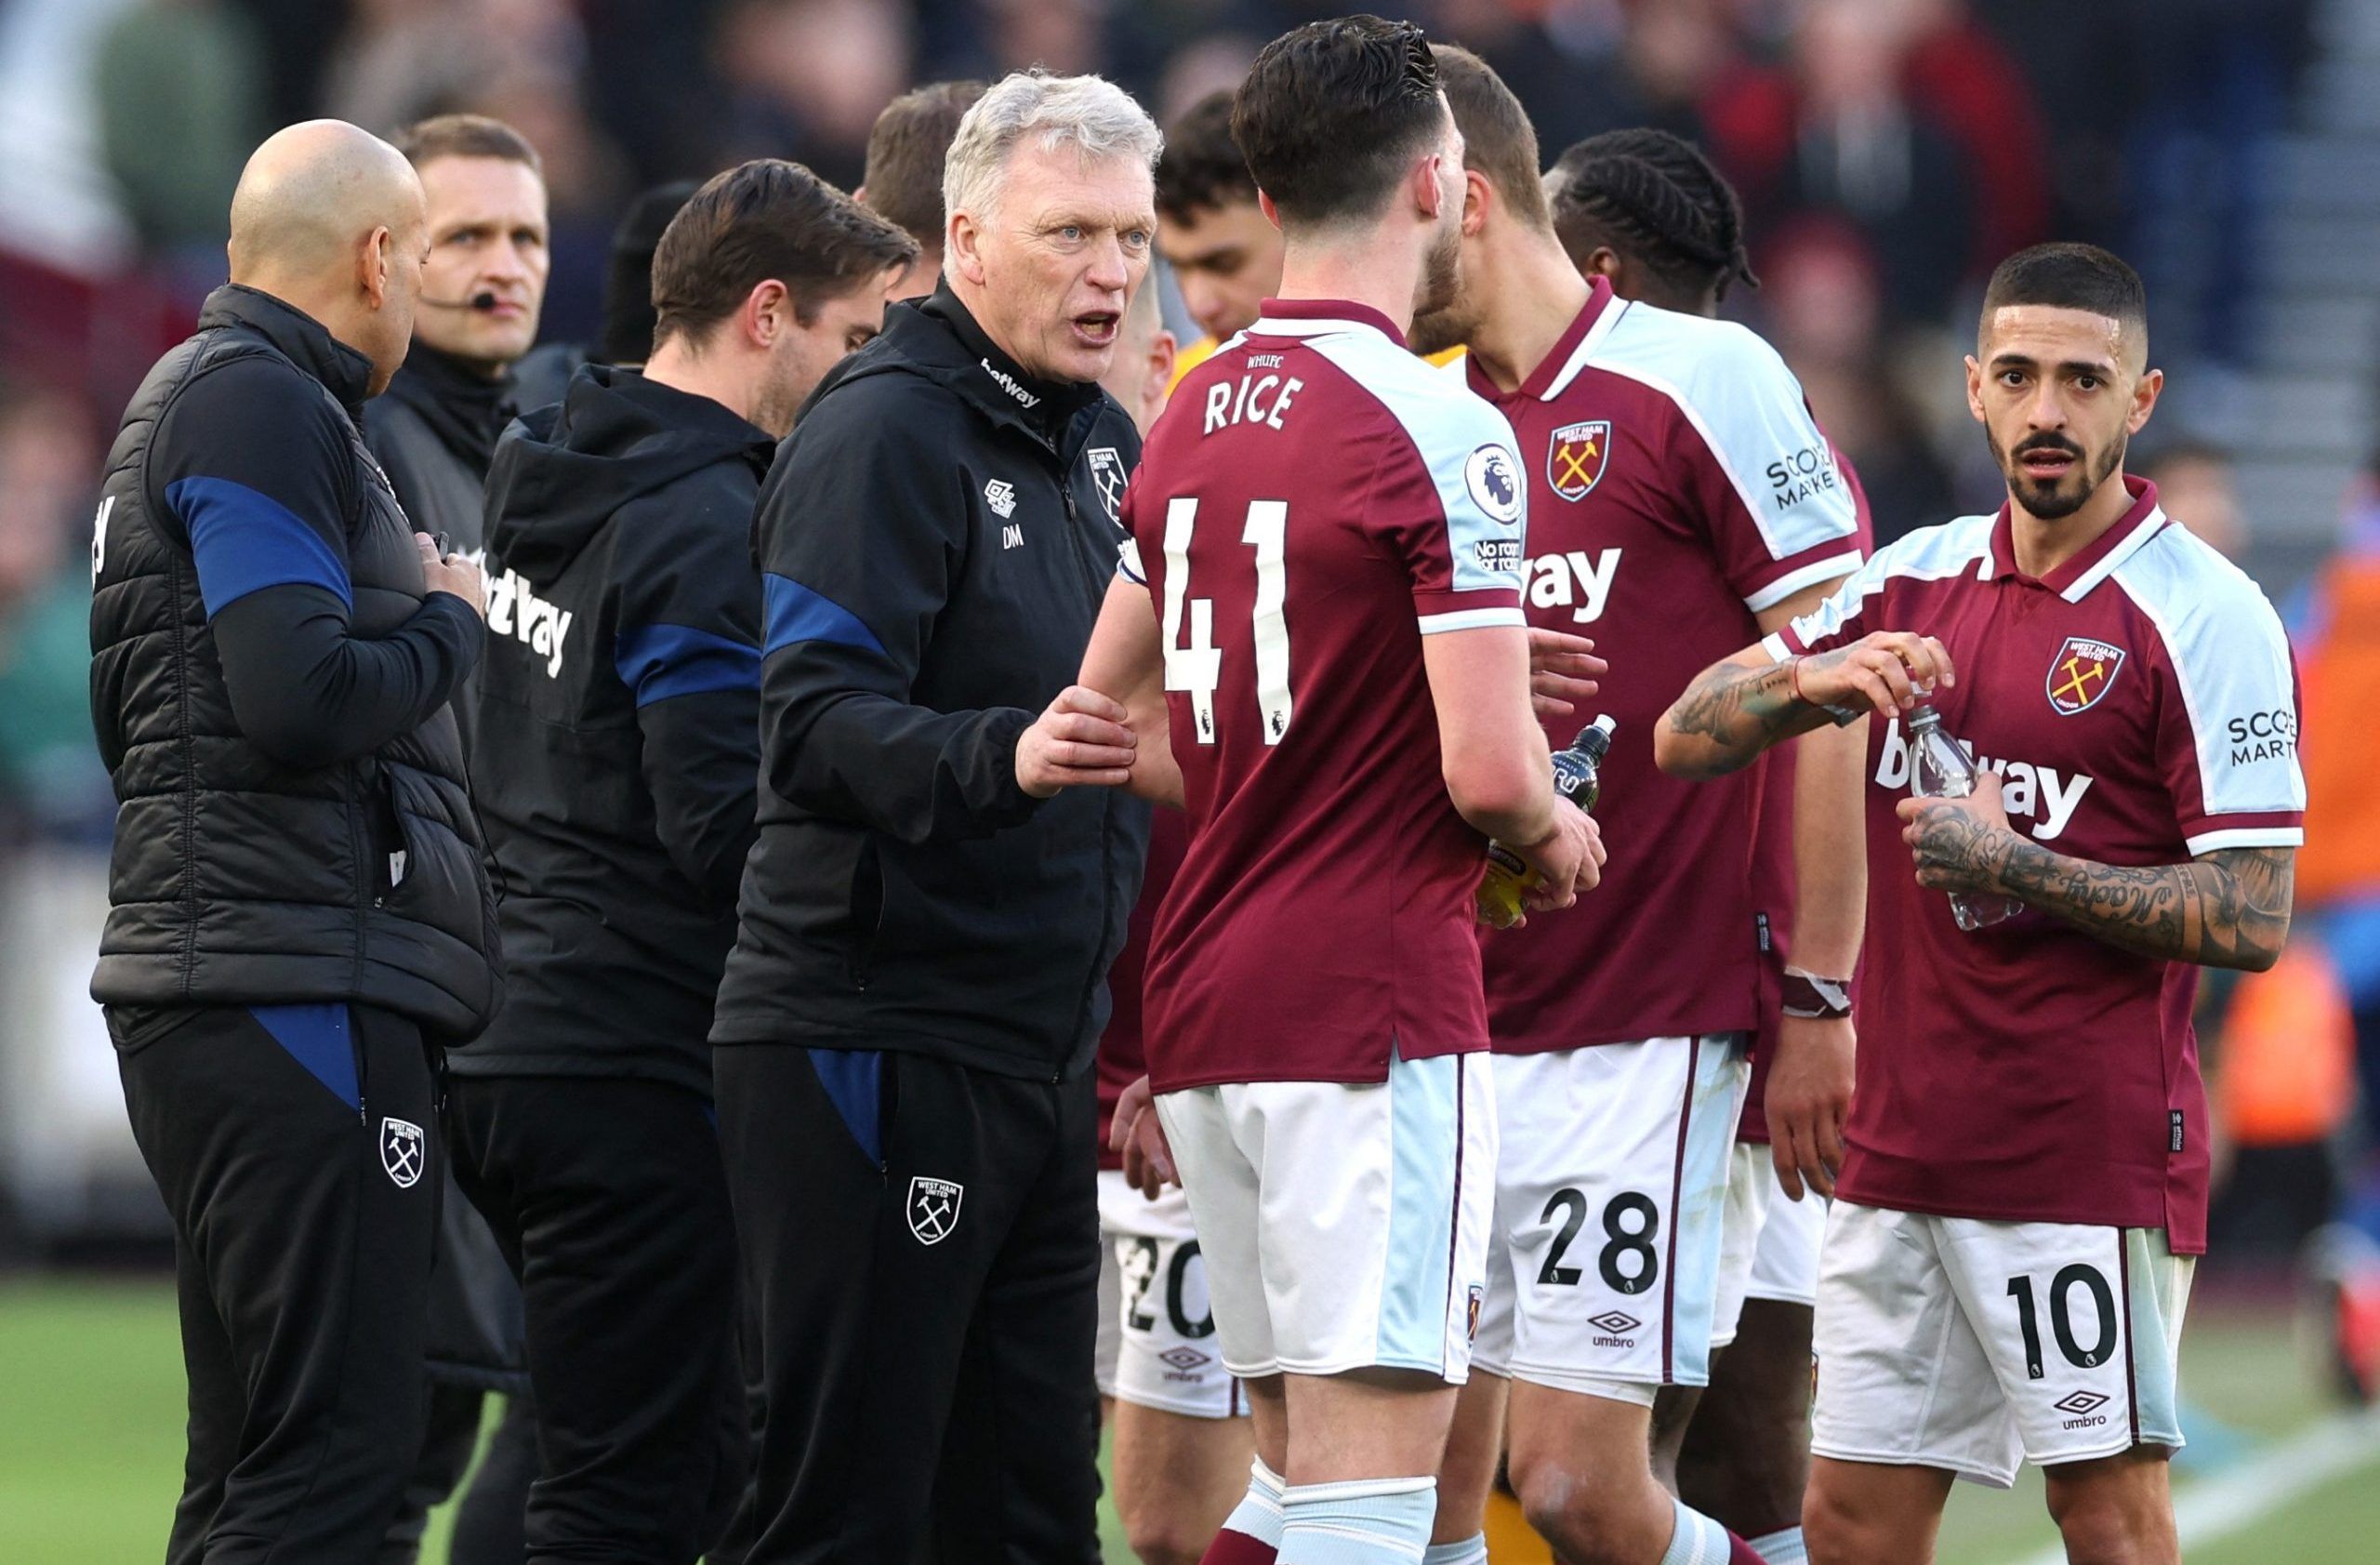 Soccer Football - Premier League - West Ham United v Wolverhampton Wanderers - London Stadium, London, Britain - February 27, 2022  West Ham United manager David Moyes gives instructions to Declan Rice Action Images via Reuters/Paul Childs